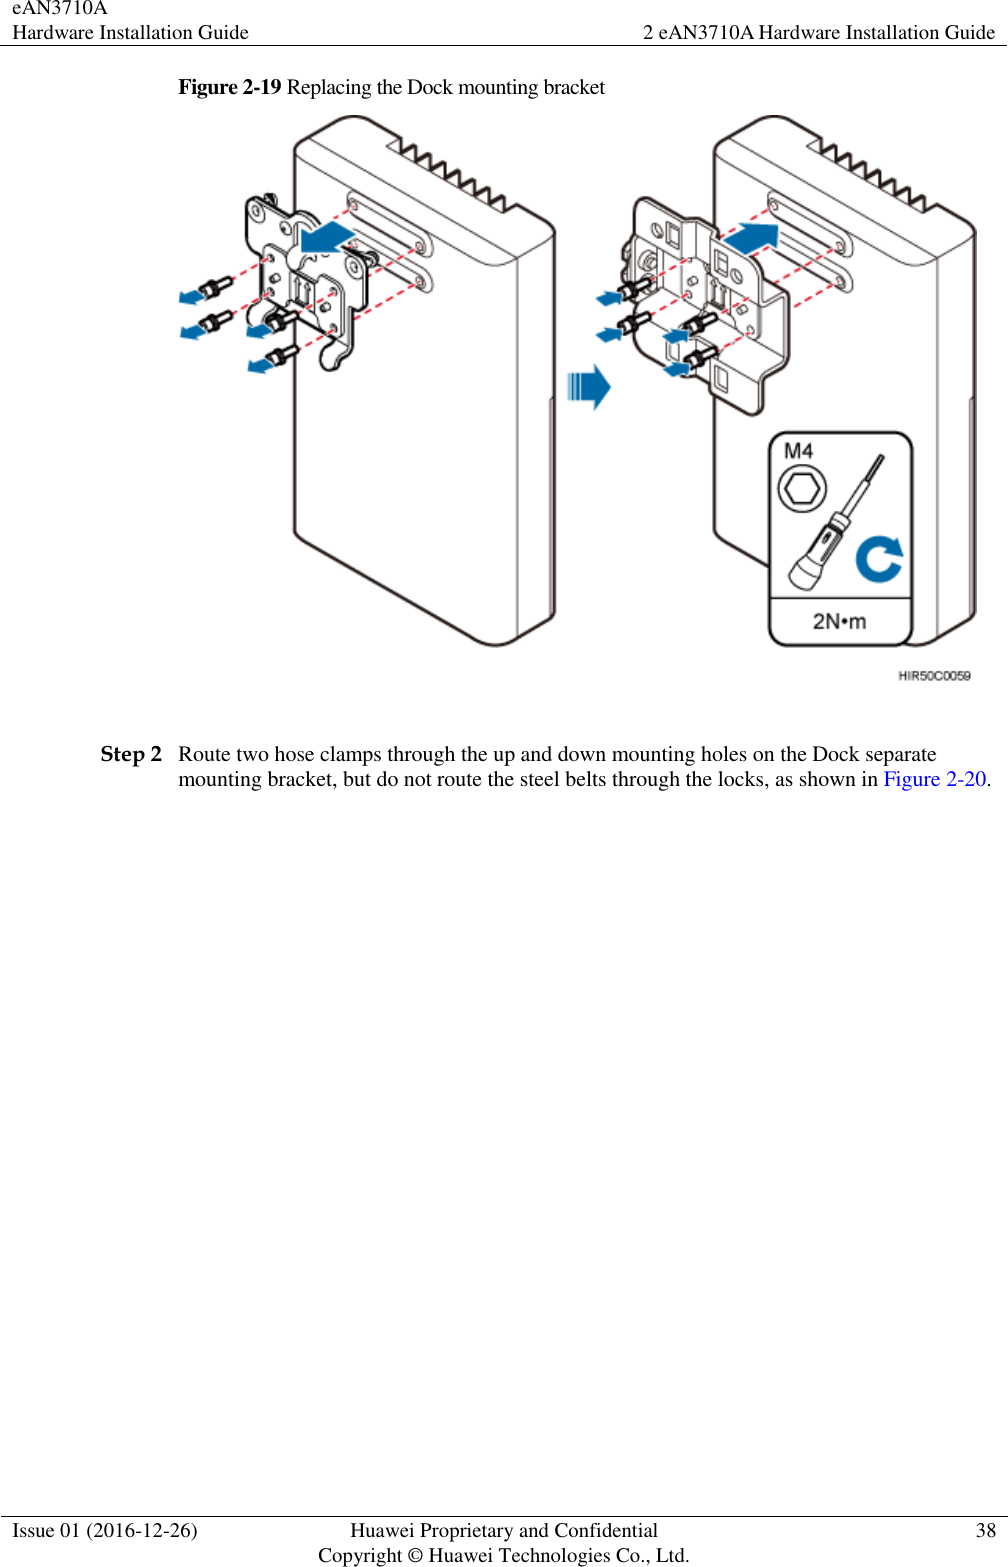 eAN3710A Hardware Installation Guide 2 eAN3710A Hardware Installation Guide  Issue 01 (2016-12-26) Huawei Proprietary and Confidential                                     Copyright © Huawei Technologies Co., Ltd. 38  Figure 2-19 Replacing the Dock mounting bracket     Step 2 Route two hose clamps through the up and down mounting holes on the Dock separate mounting bracket, but do not route the steel belts through the locks, as shown in Figure 2-20. 